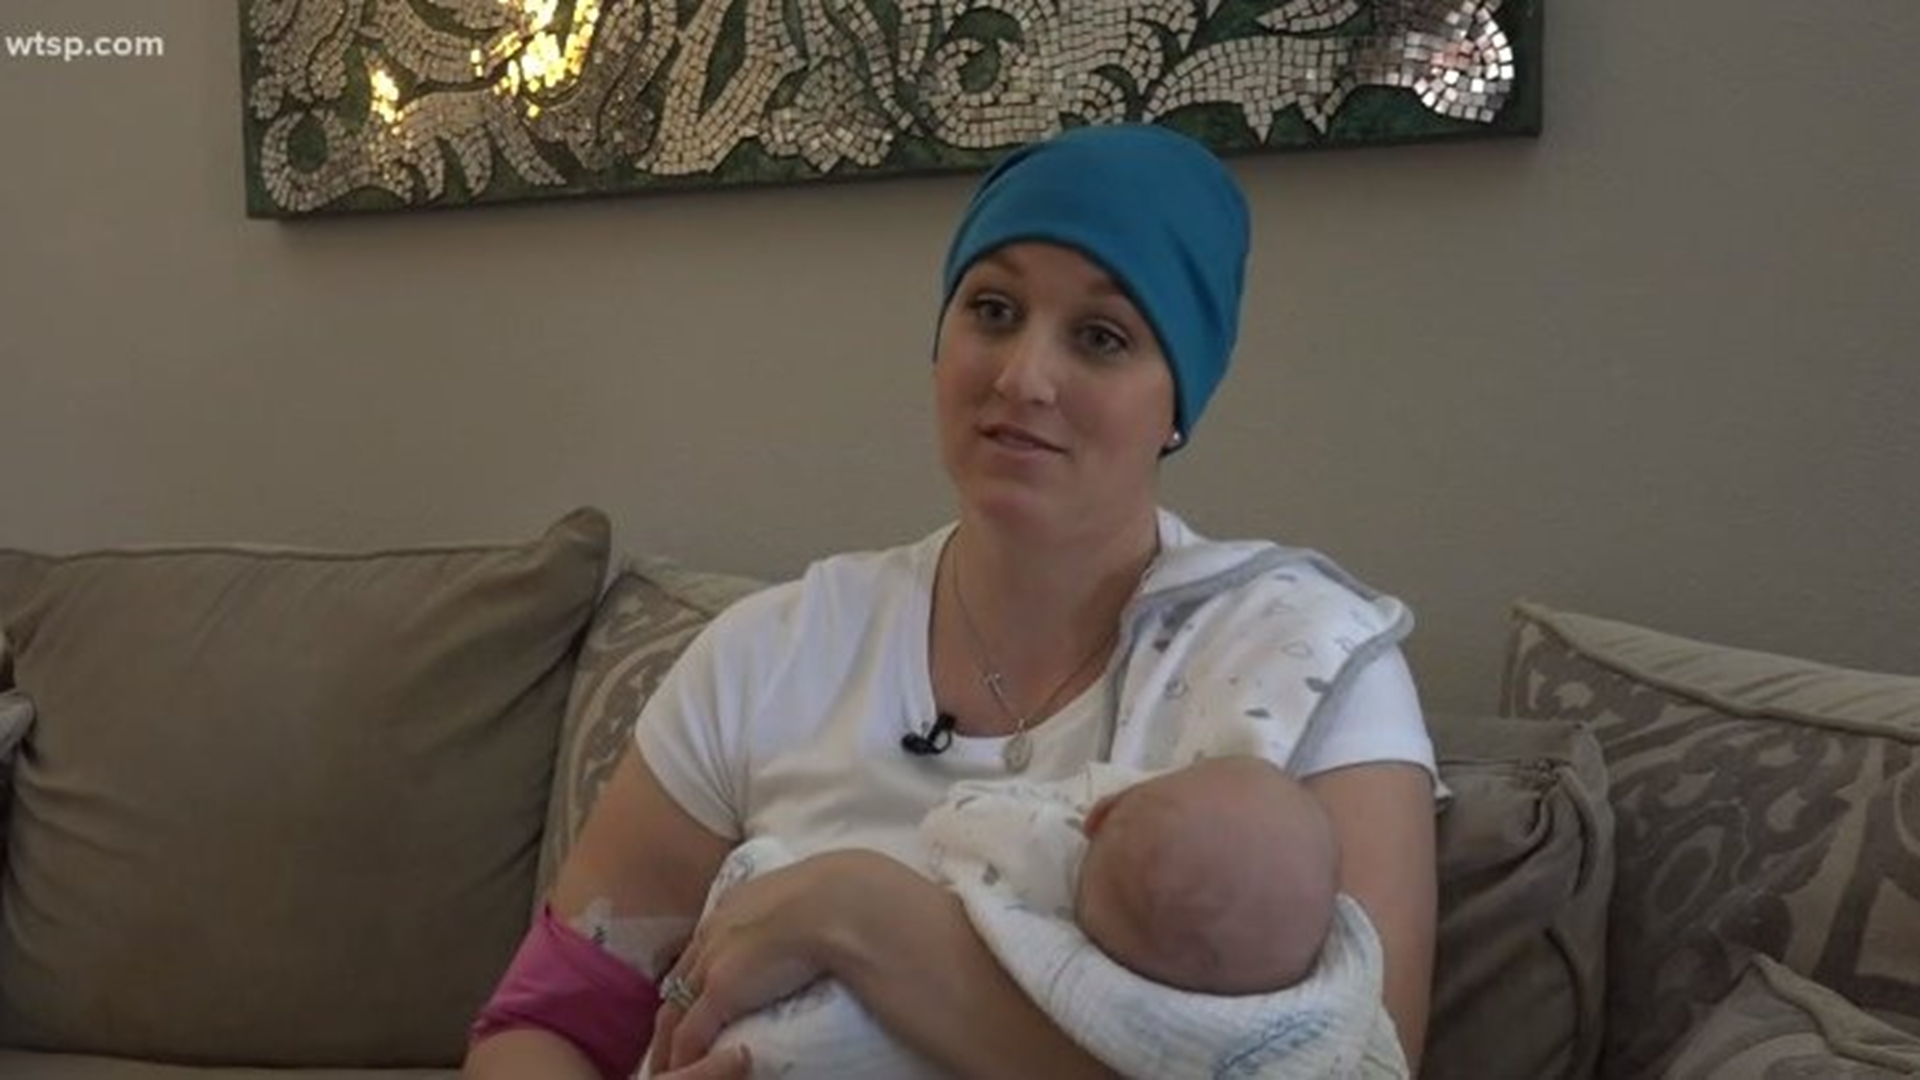 Baby Jameson is one month old and mom is one week away from finishing chemo, but her latest battle is just getting started.